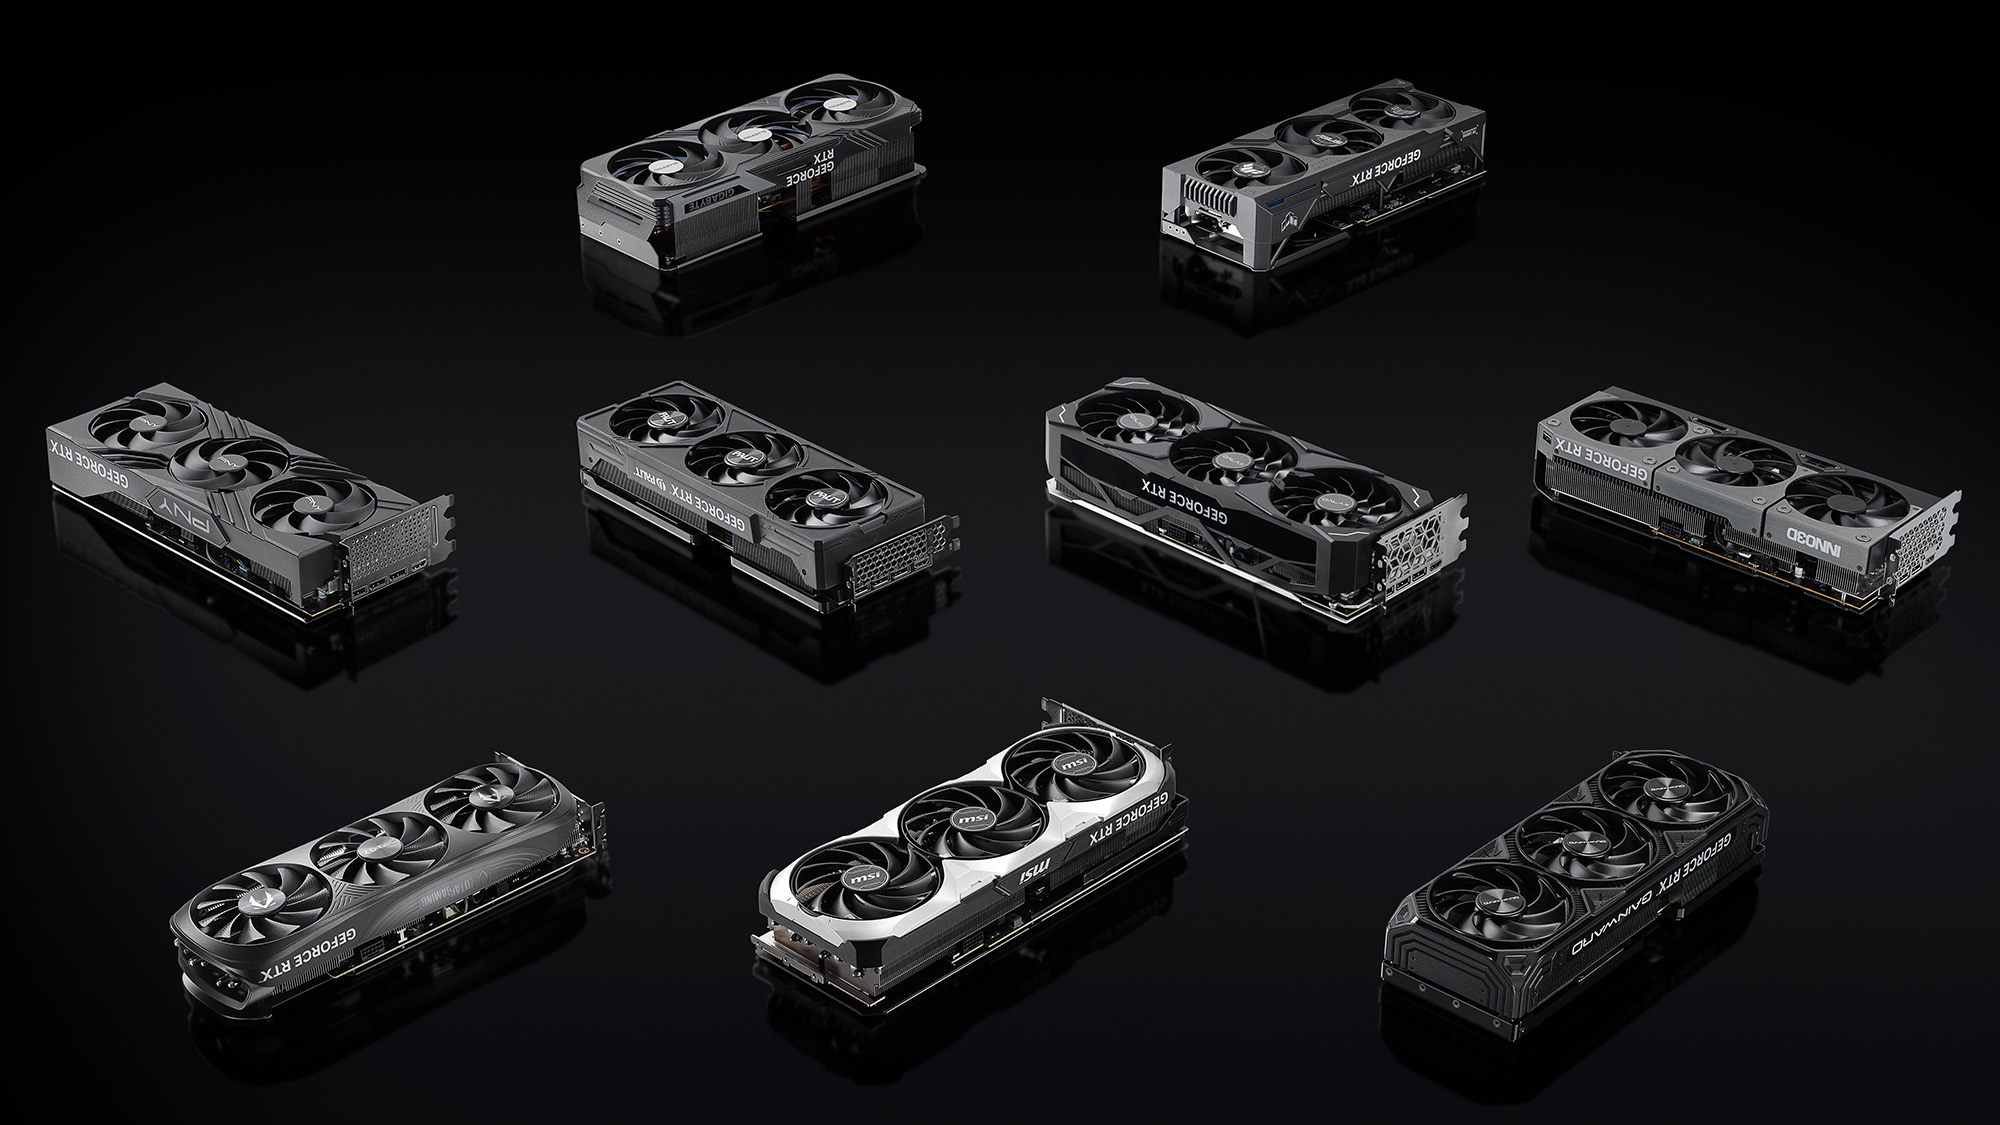 nvidia-rtx-4080-super-gets-tempting-discounts-–-but-are-bigger-price-cuts-coming,-prompted-by-the-rtx-5080-gpu?